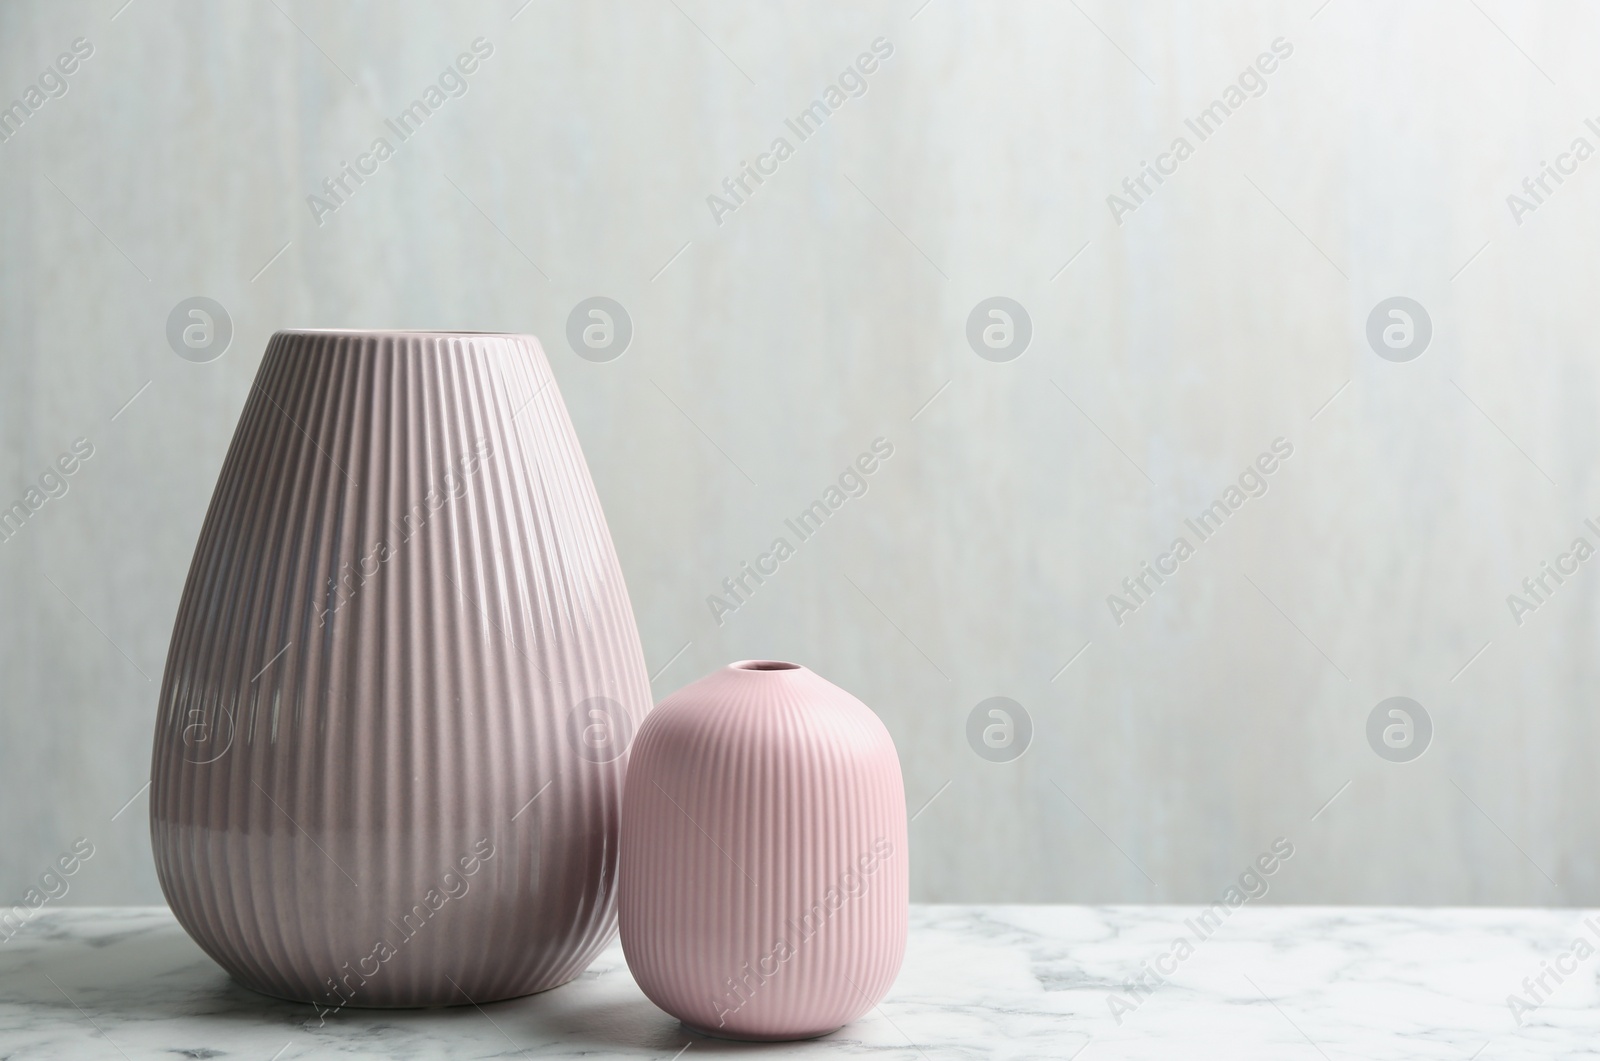 Photo of Stylish pink ceramic vases on white marble table, space for text